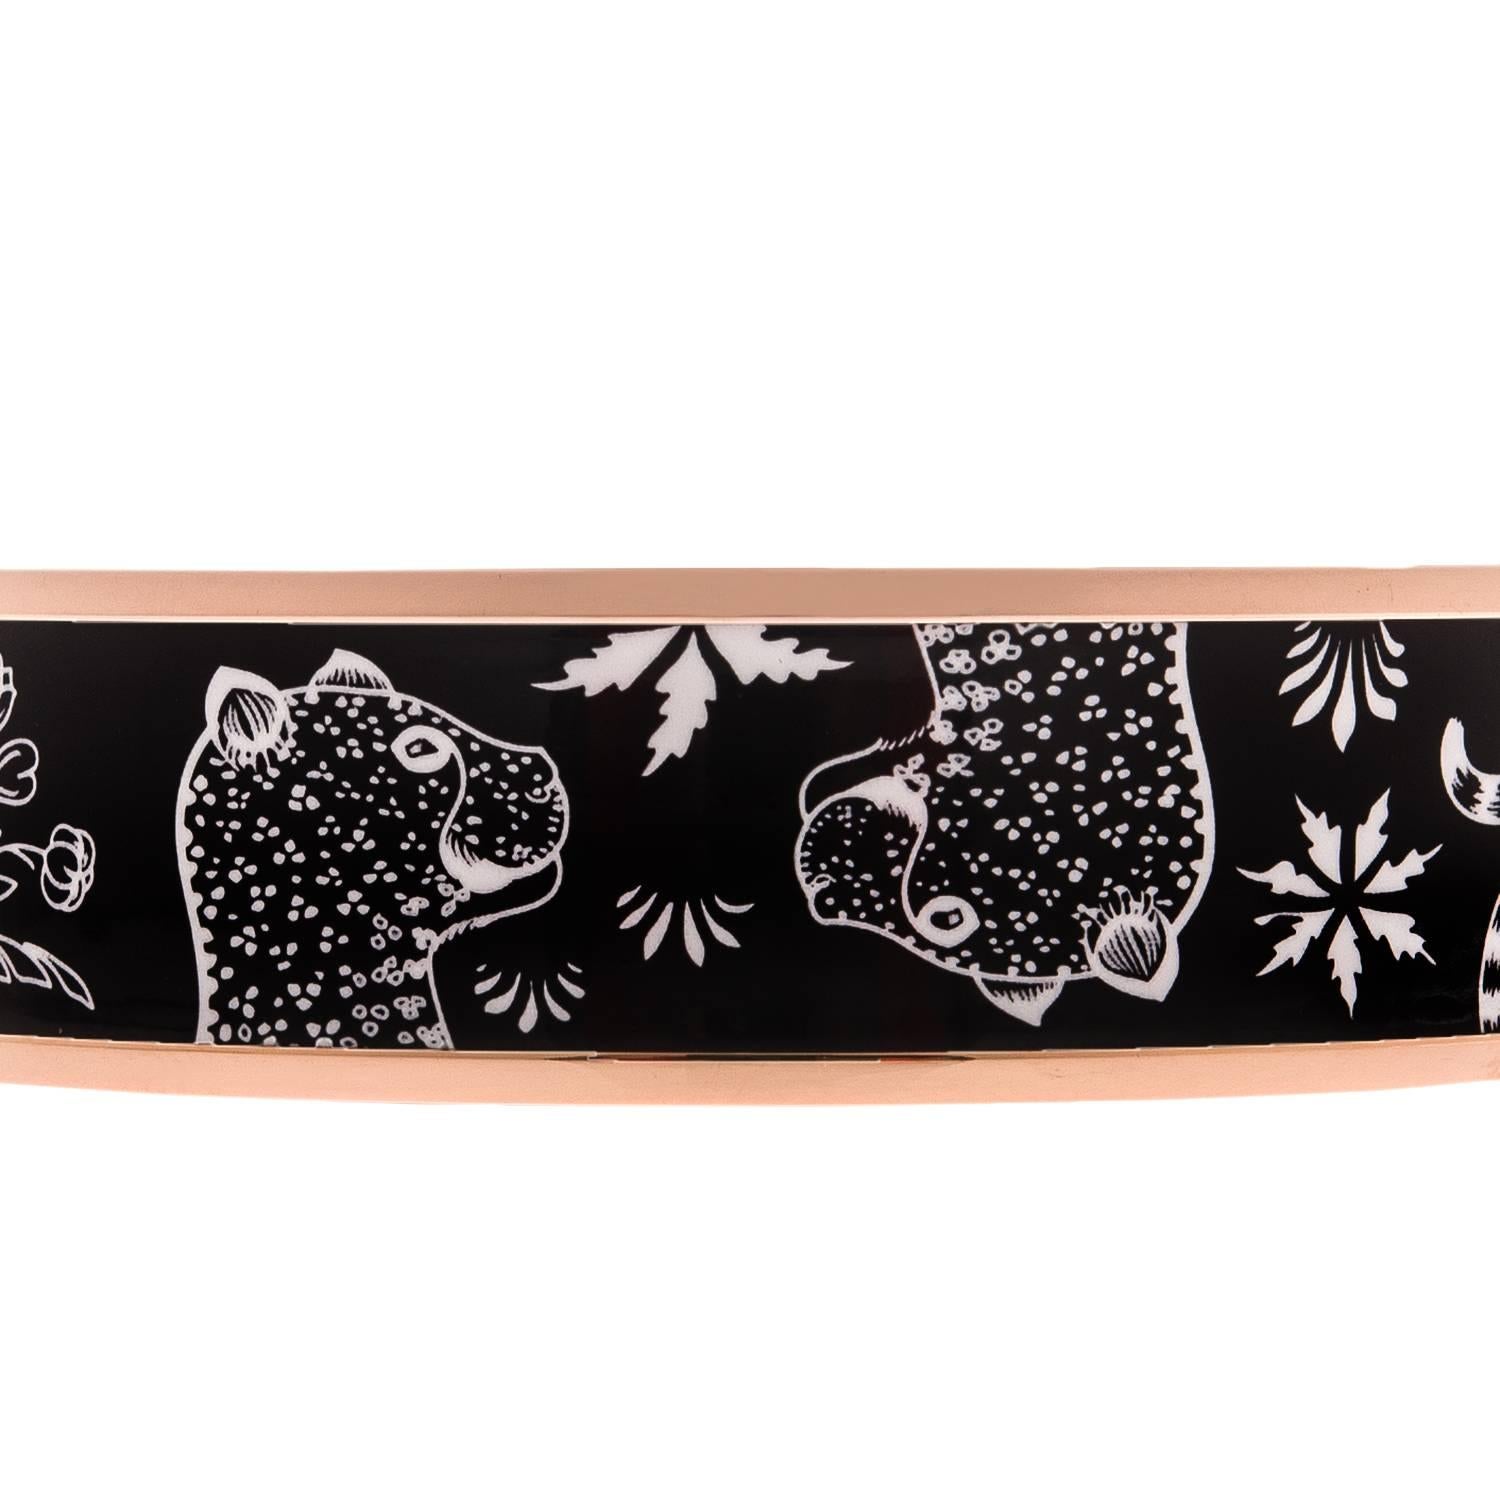 Hermes "Les Leopards" wide printed enamel bracelet size PM (65).
 
This bracelet depicts leopards and flowers in a black background with rose gold plated hardware. 

Origin: France
 
Condition: Never Worn
 
Accompanied by: Hermes box,